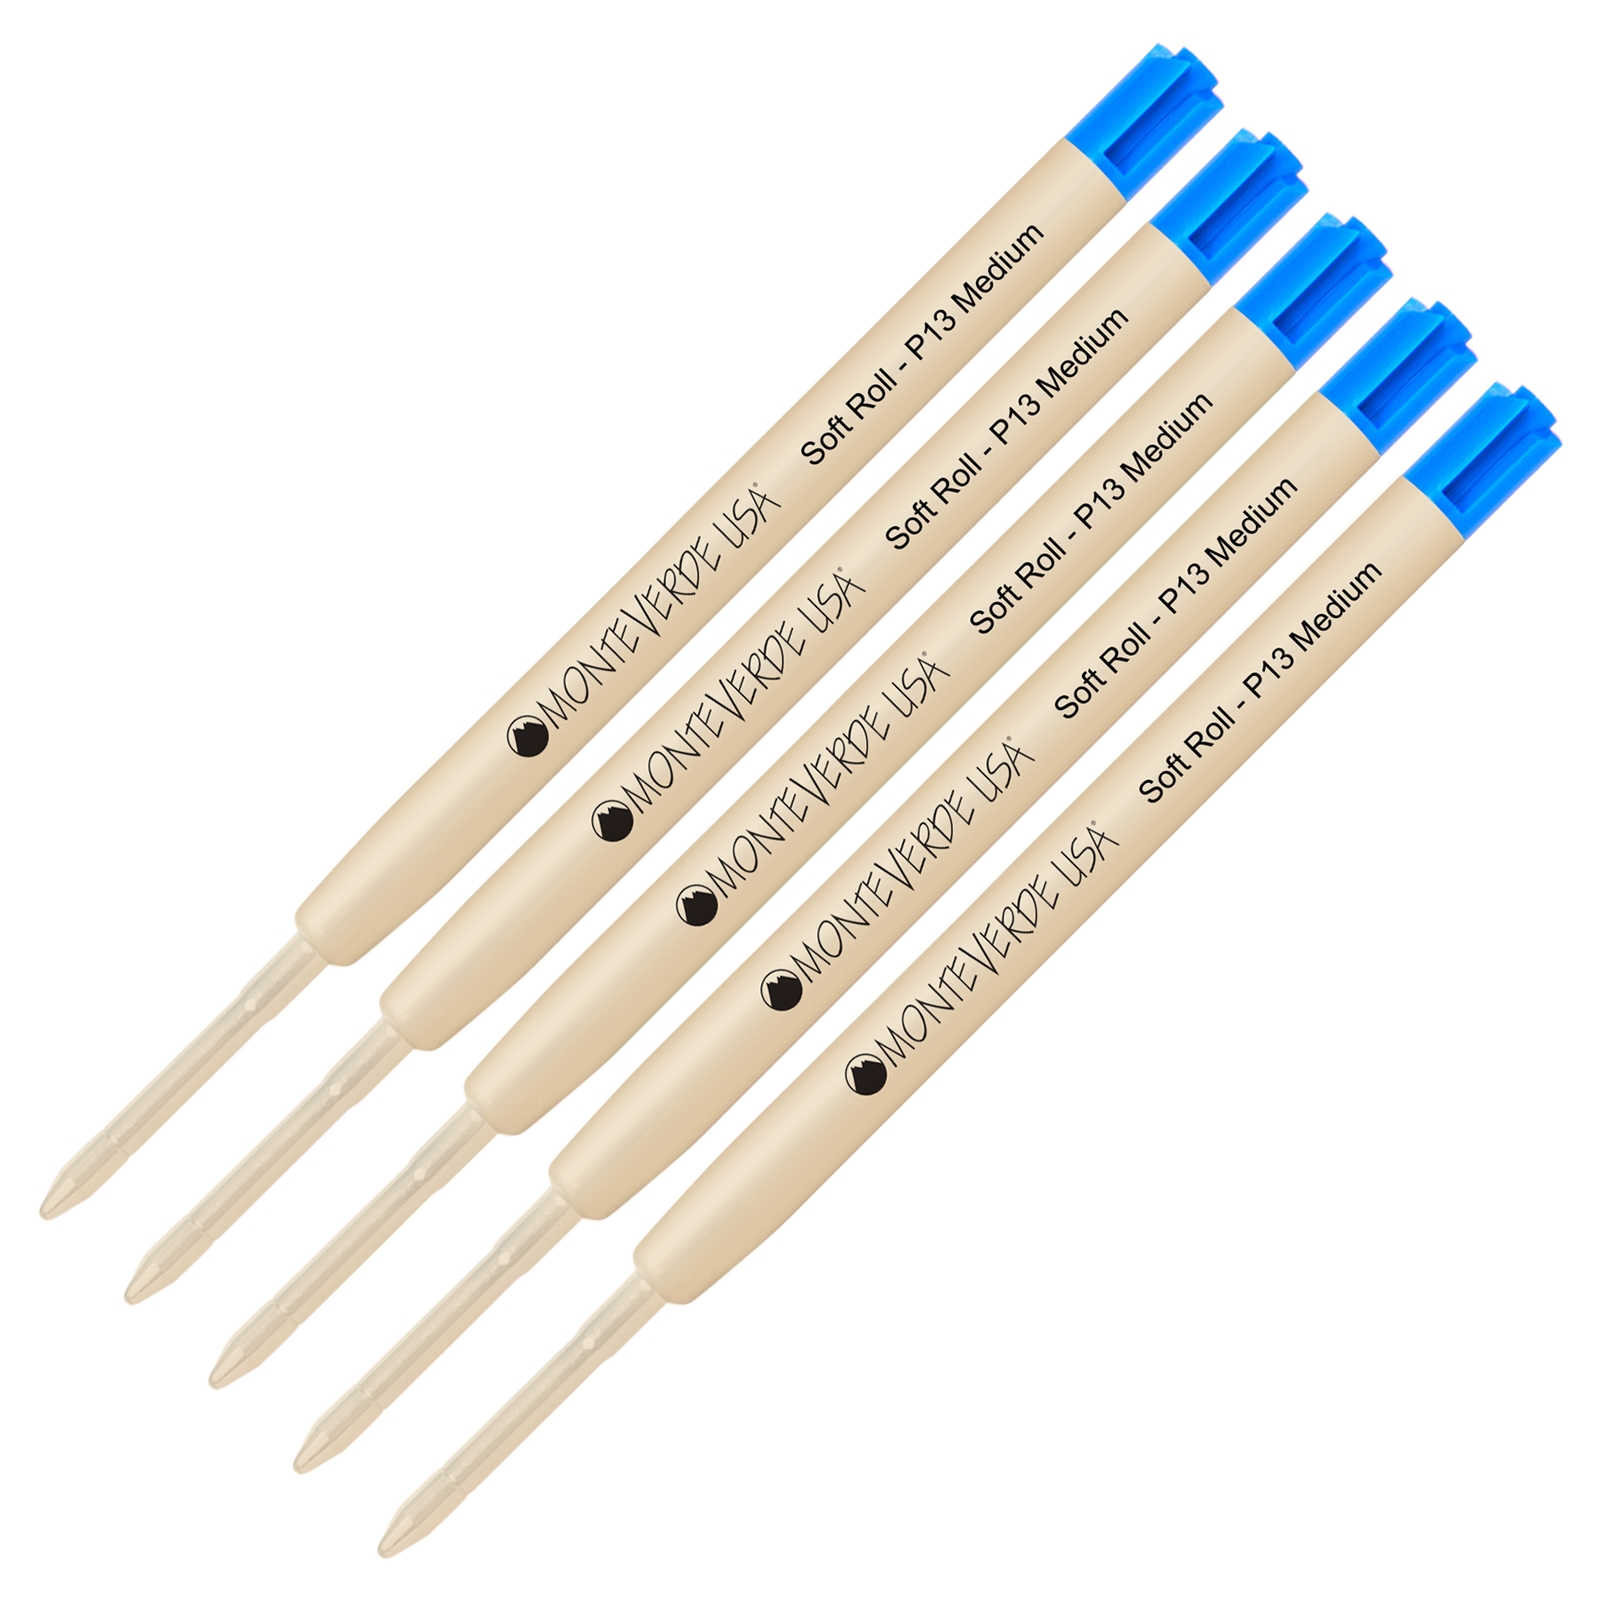 5 Pack - Monteverde SoftRoll Ballpoint P13 Paste Ink Refill Compatible with most Parker Style Ballpoint Pens - Blue (Medium Tip 0.7mm)